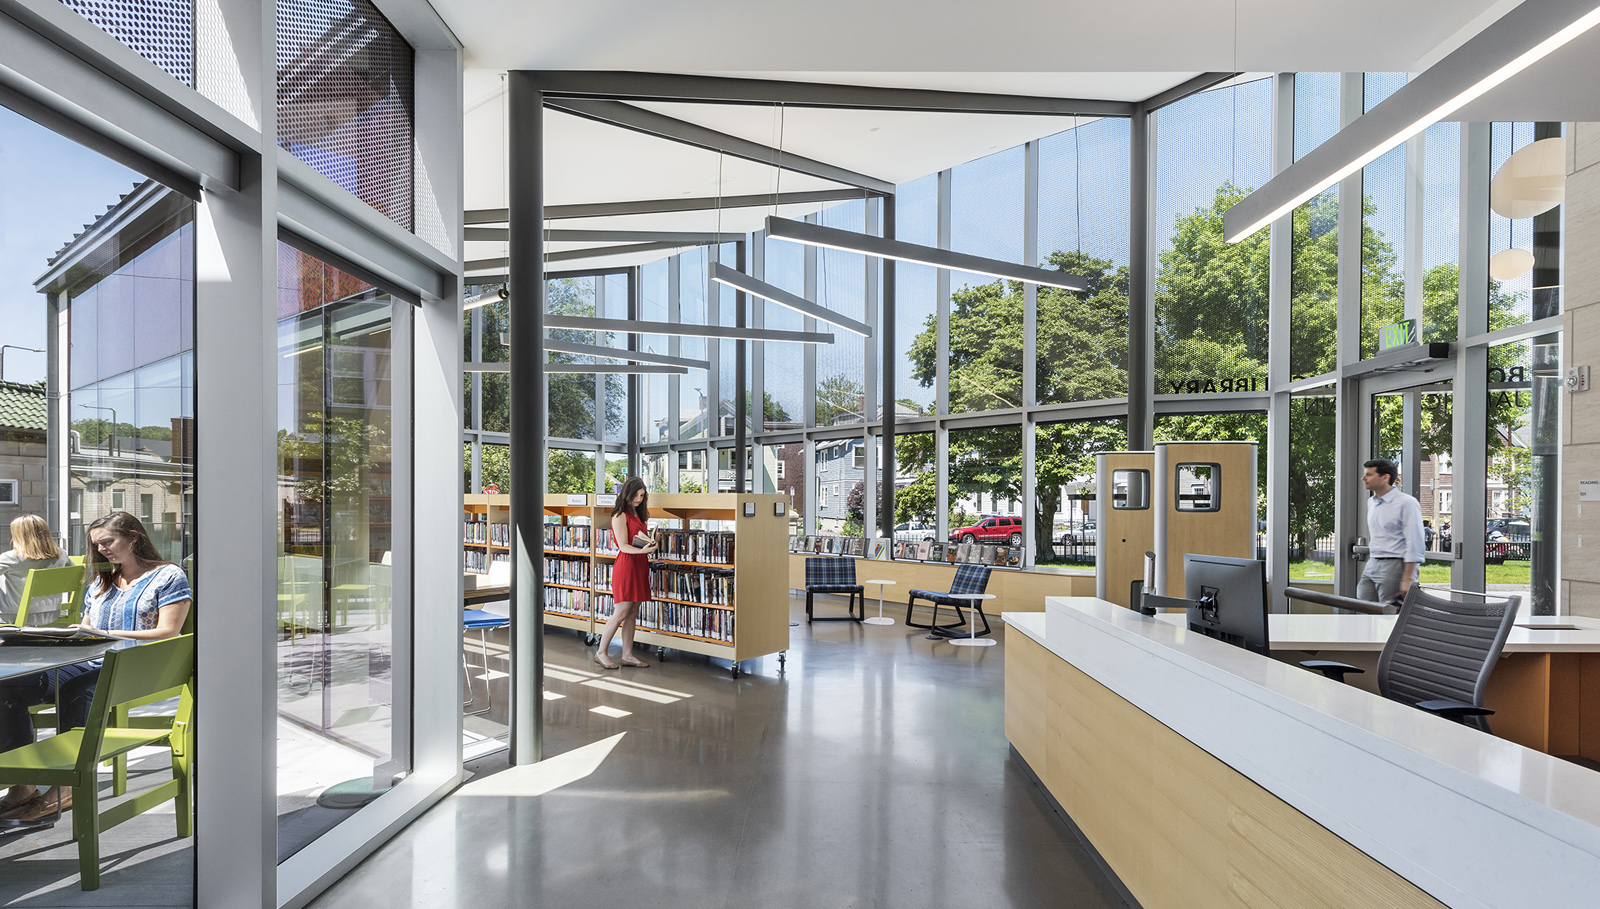 An image of the Boston Public library Jamaica Plain branch front desk and shelves